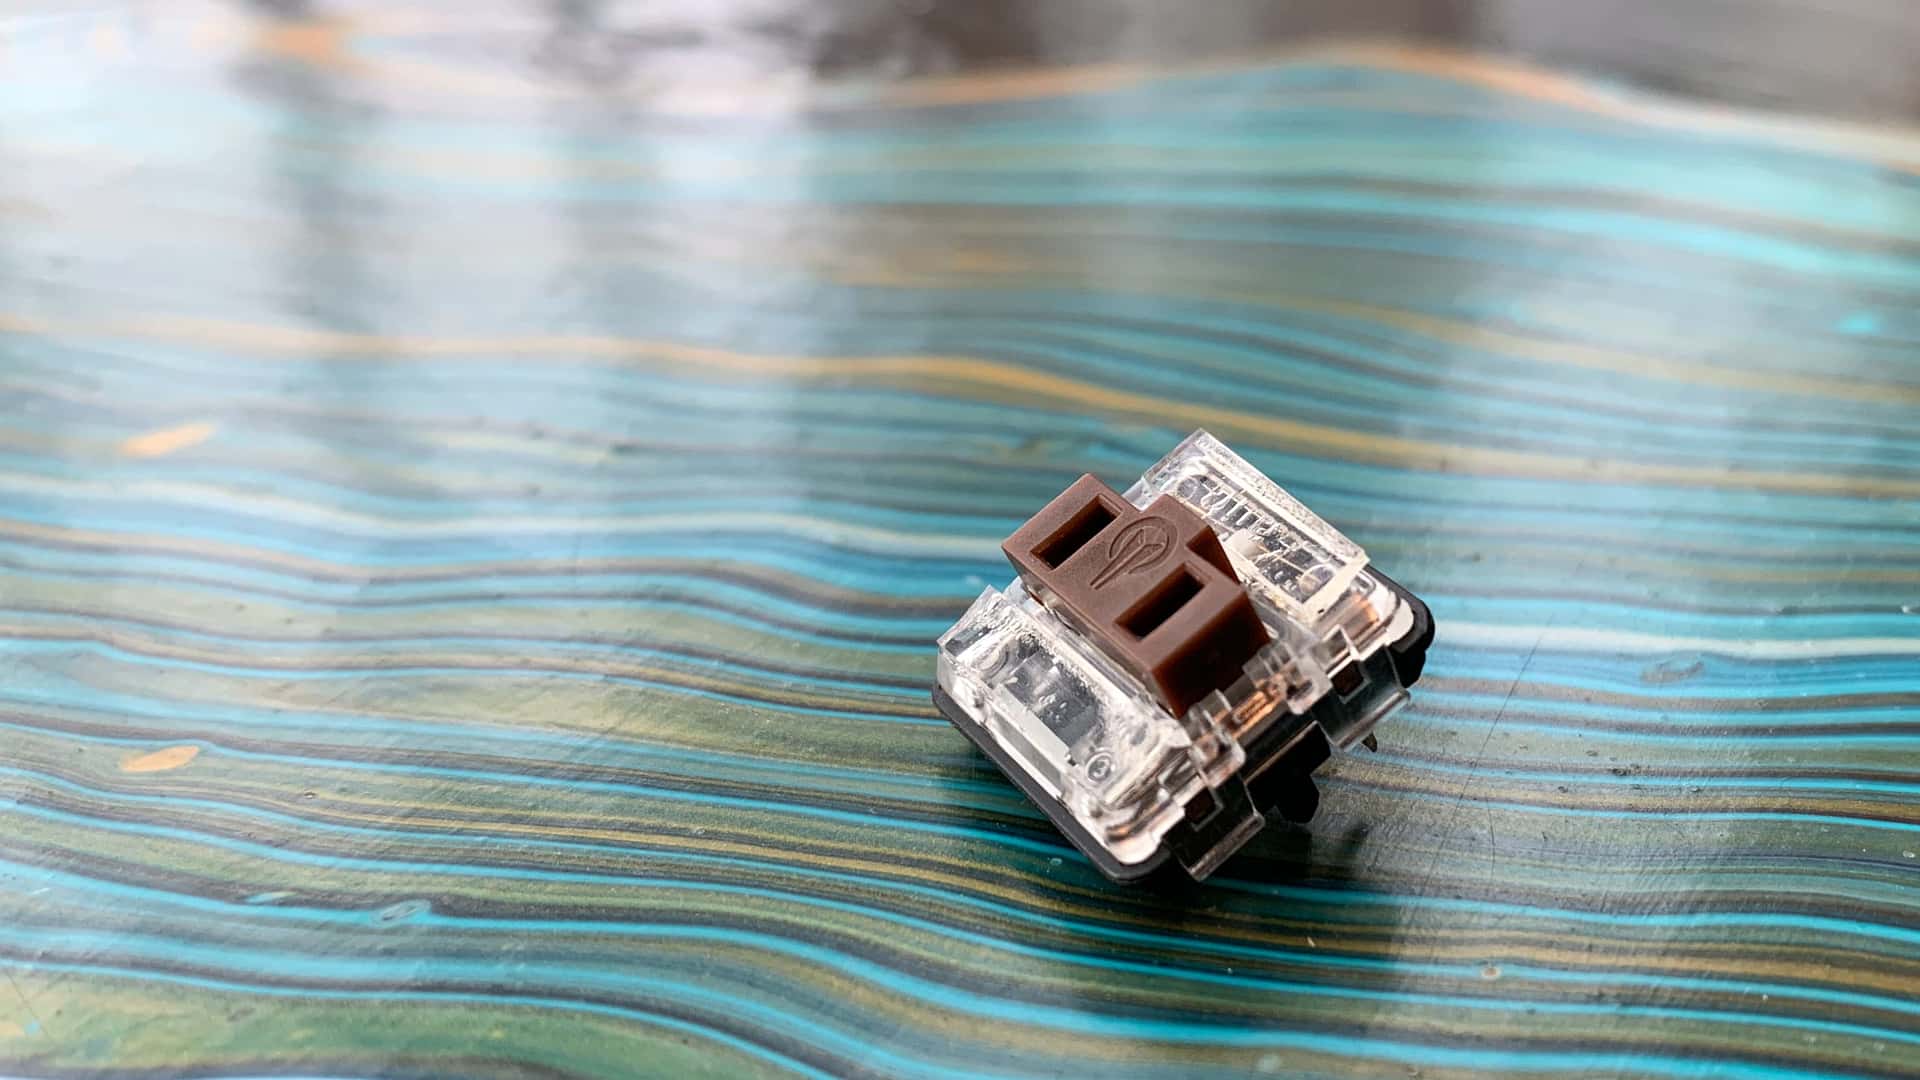 Kailh “Choc” Brown key switch silenced with 1-mm-thick adhesive silicone pads